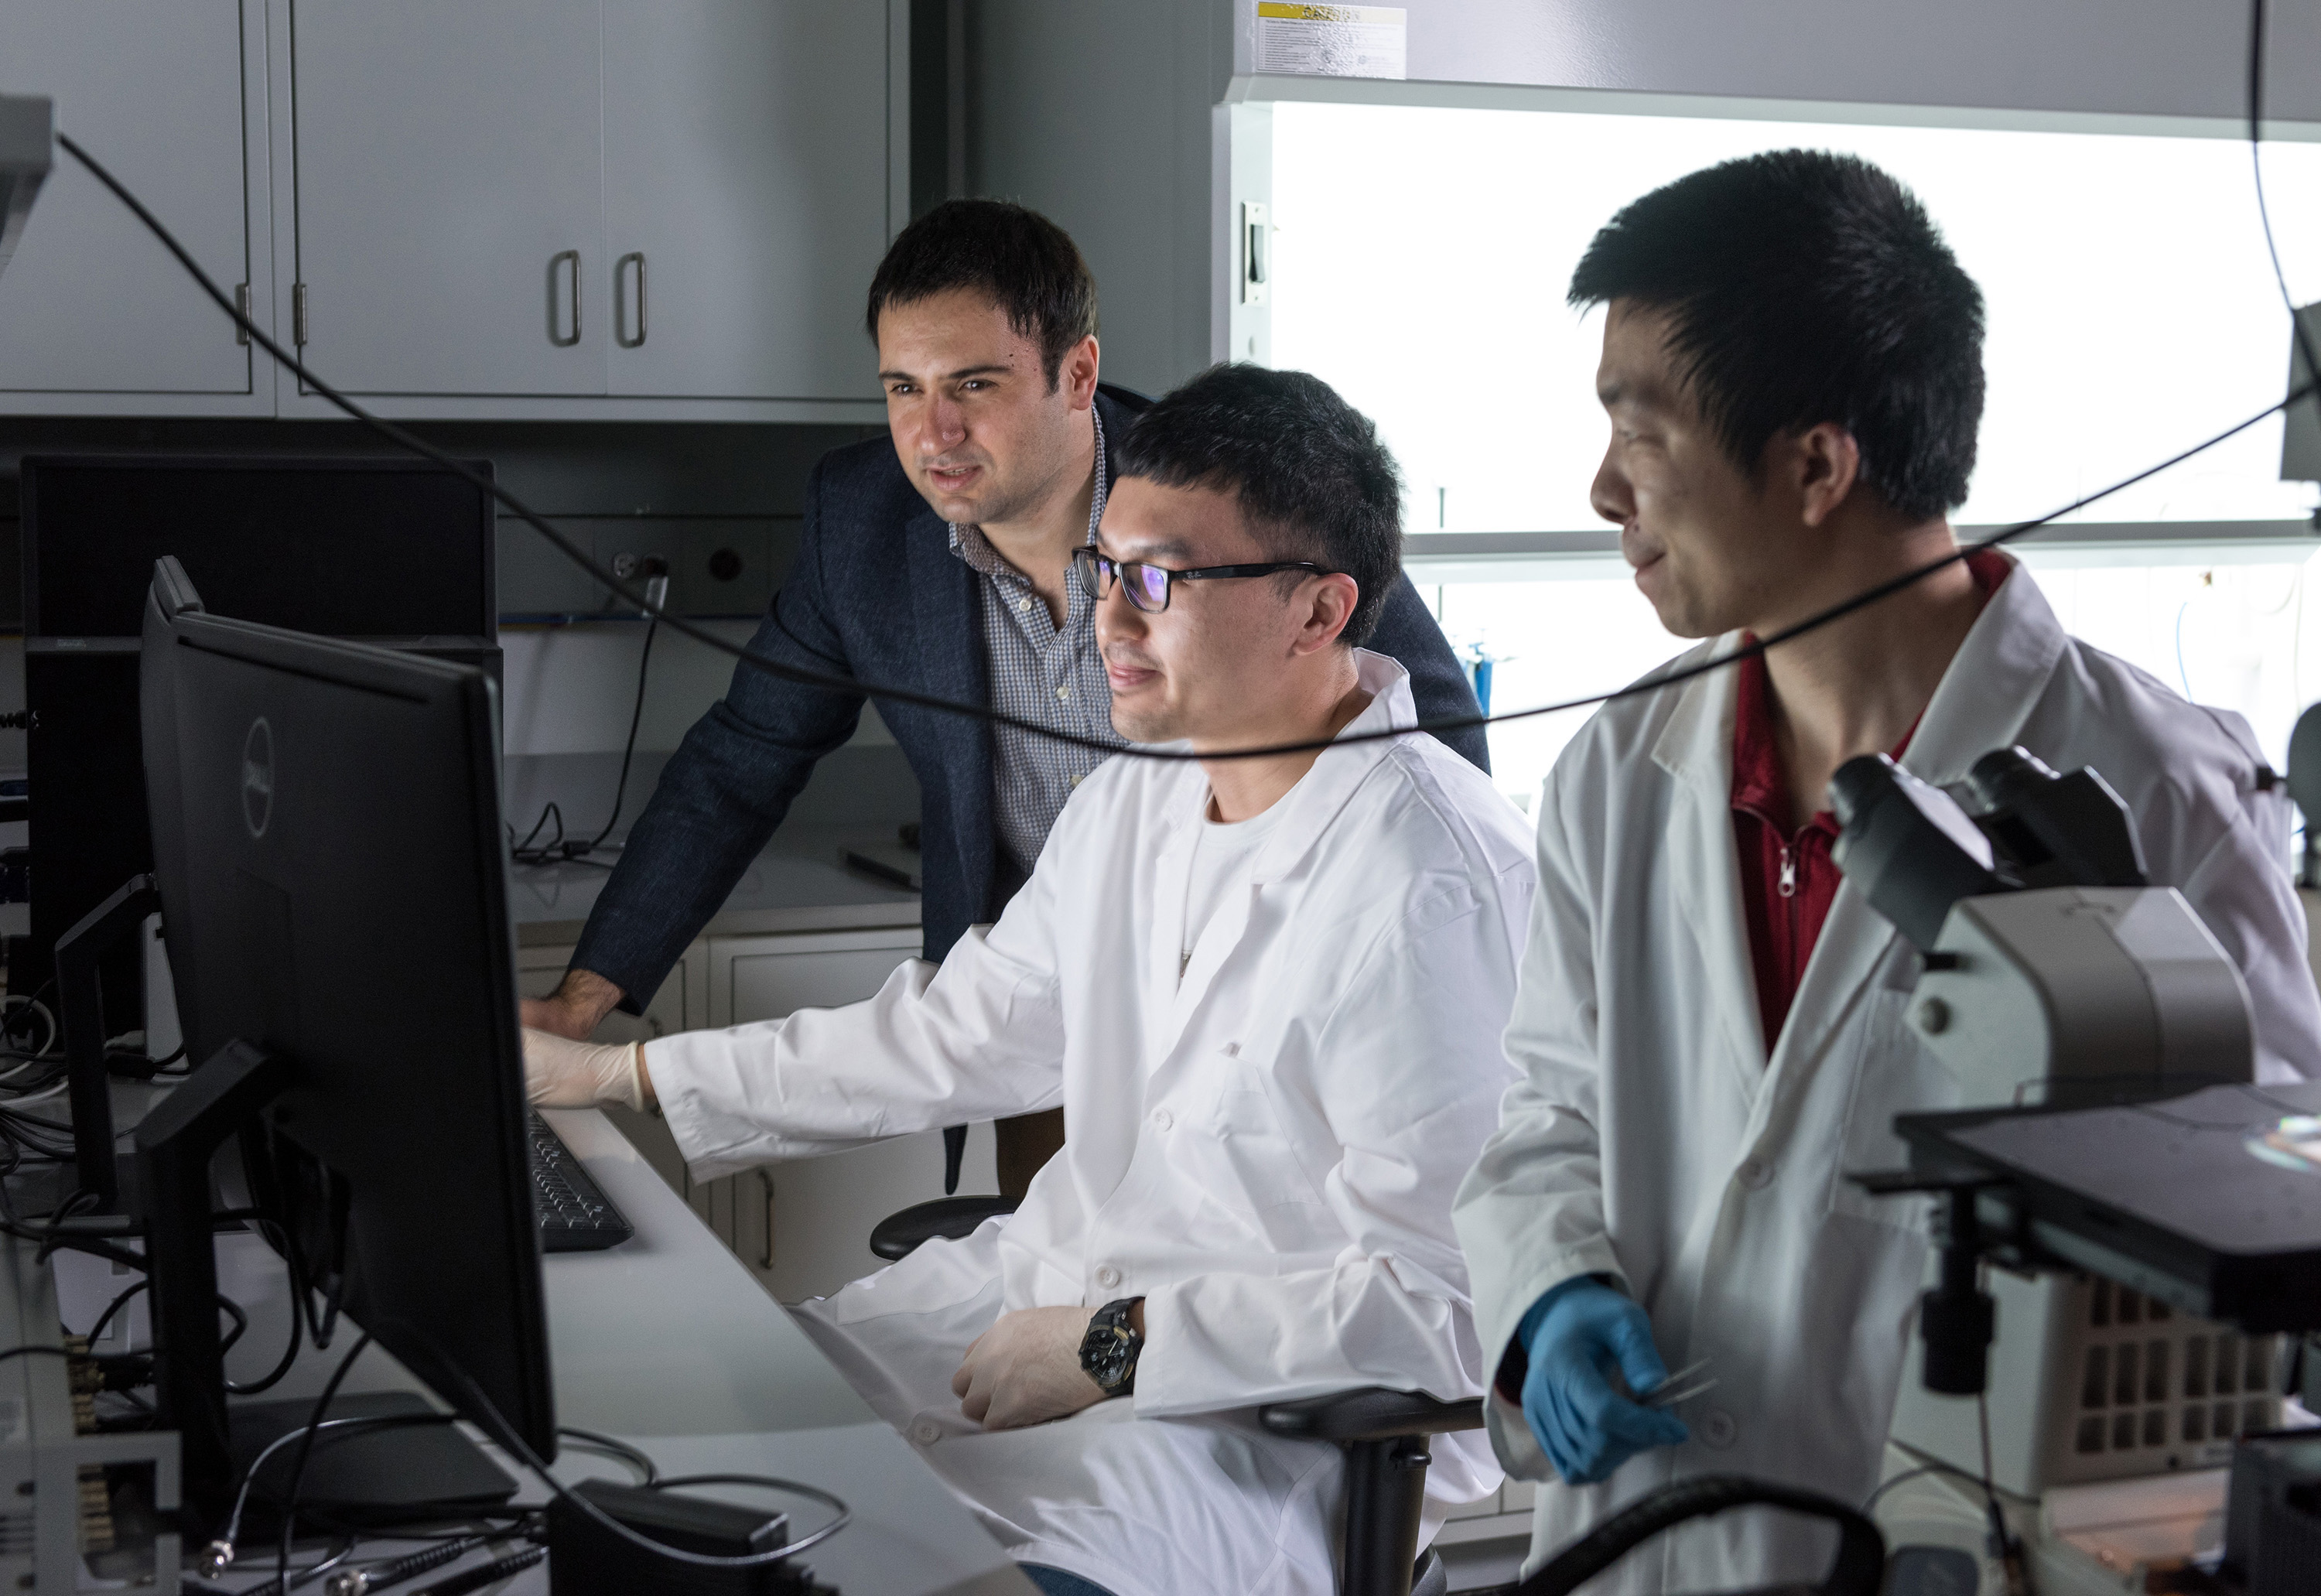 Georgia Tech researchers have developed a hybrid microfluidic chip that could provide the electronic intelligence that might one day allow inexpensive labs on a chip to conduct sophisticated medical testing outside the confines of hospitals and clinics. Shown are (l-r) Fatih Sarioglu, Ningquan Wang and Ruxiu Liu. (Credit: Rob Felt, Georgia Tech)